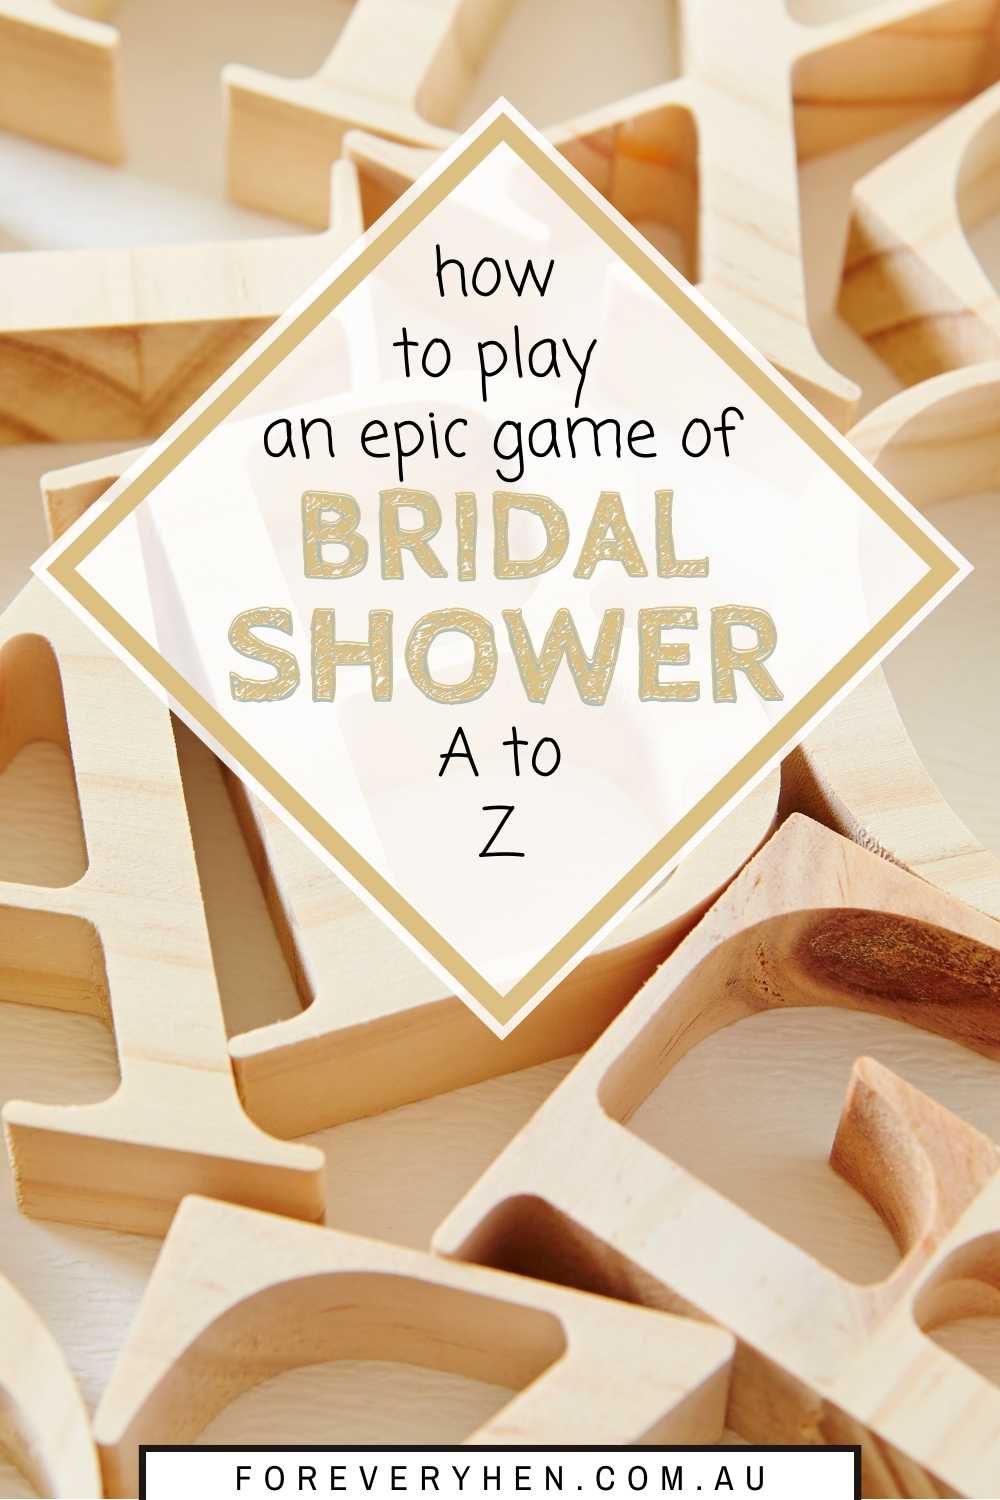 Bridal Shower A to Z